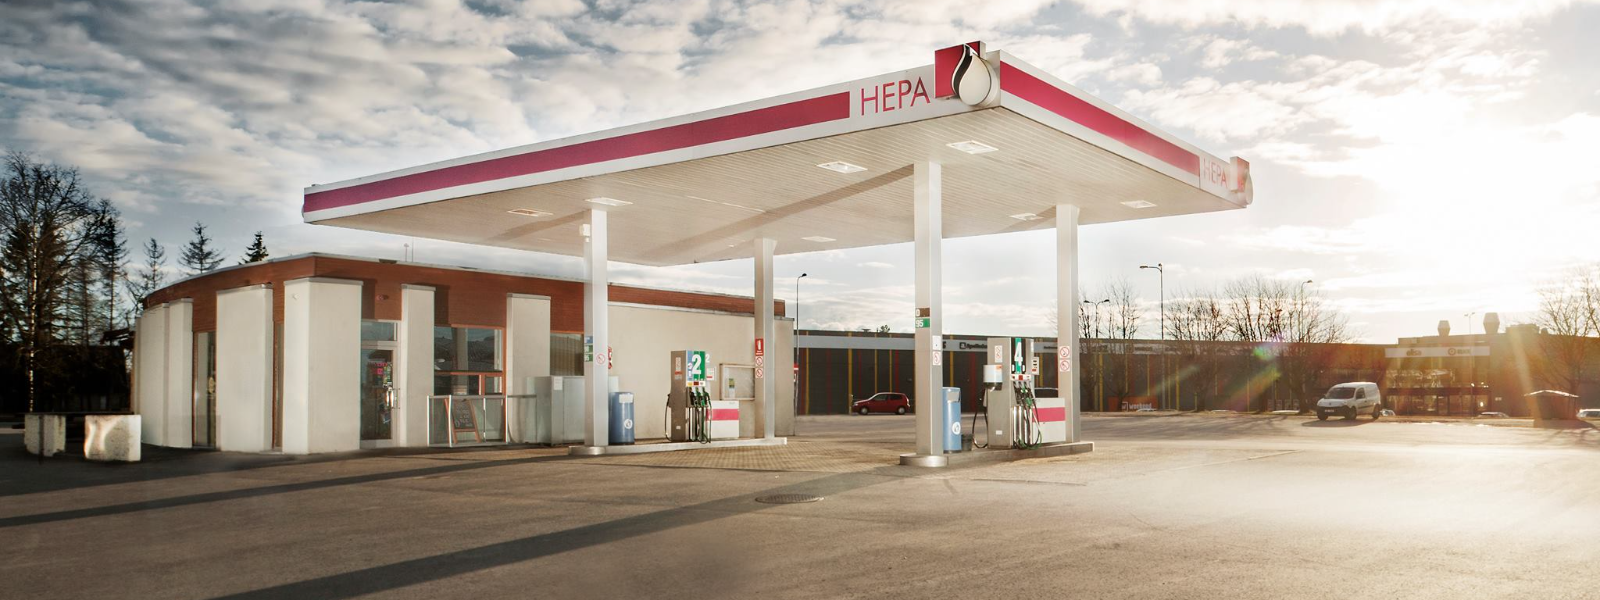 Retail sale of automotive fuel inc. activities of fuelling stations in Rapla